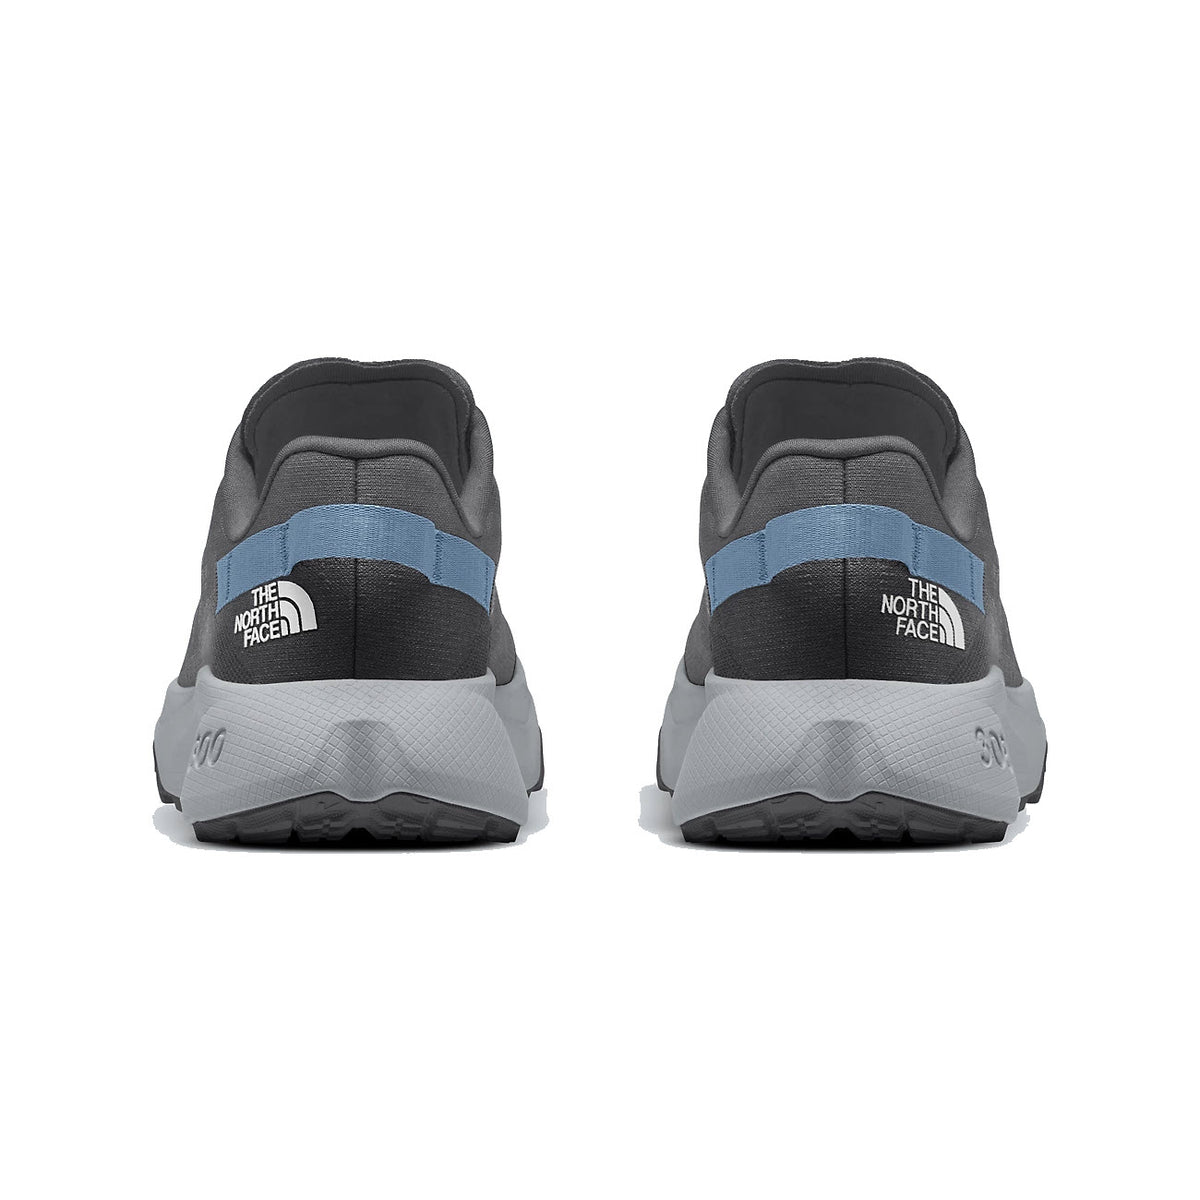 Rear view of two identical North Face ALTMESA 300 Pearl/High Rise trail-running shoes in gray, black, and blue, featuring prominent brand logos and SURFACE CTRL rubber outsoles.